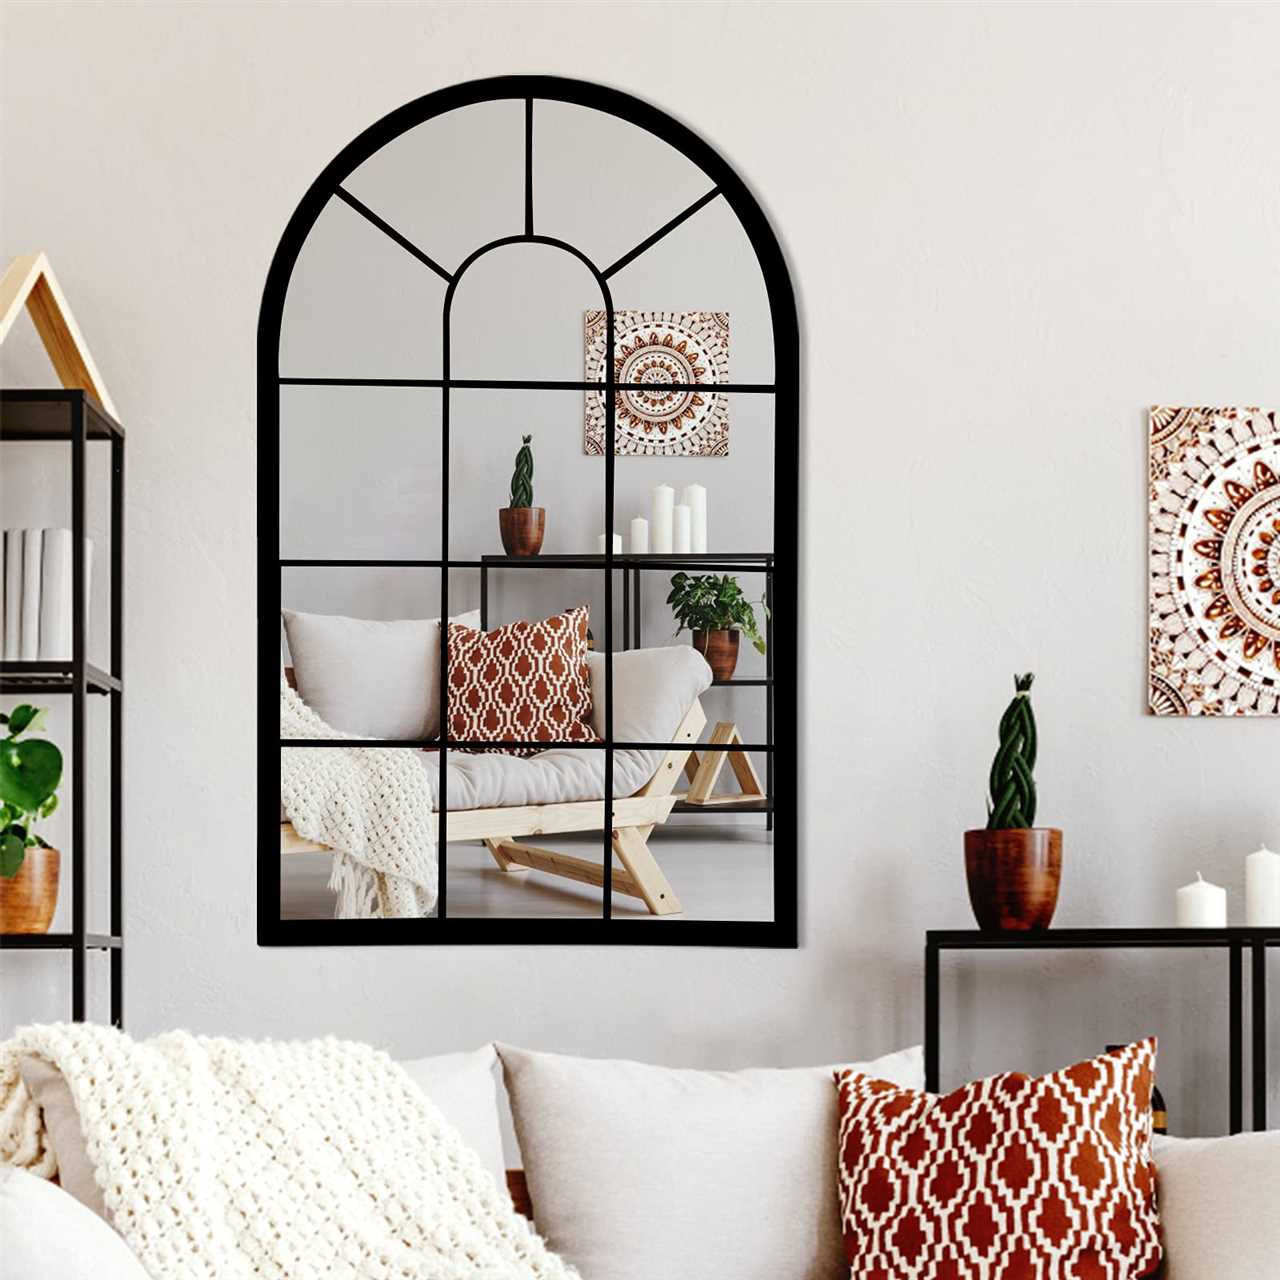 Why Choose Large Wall Mirrors?